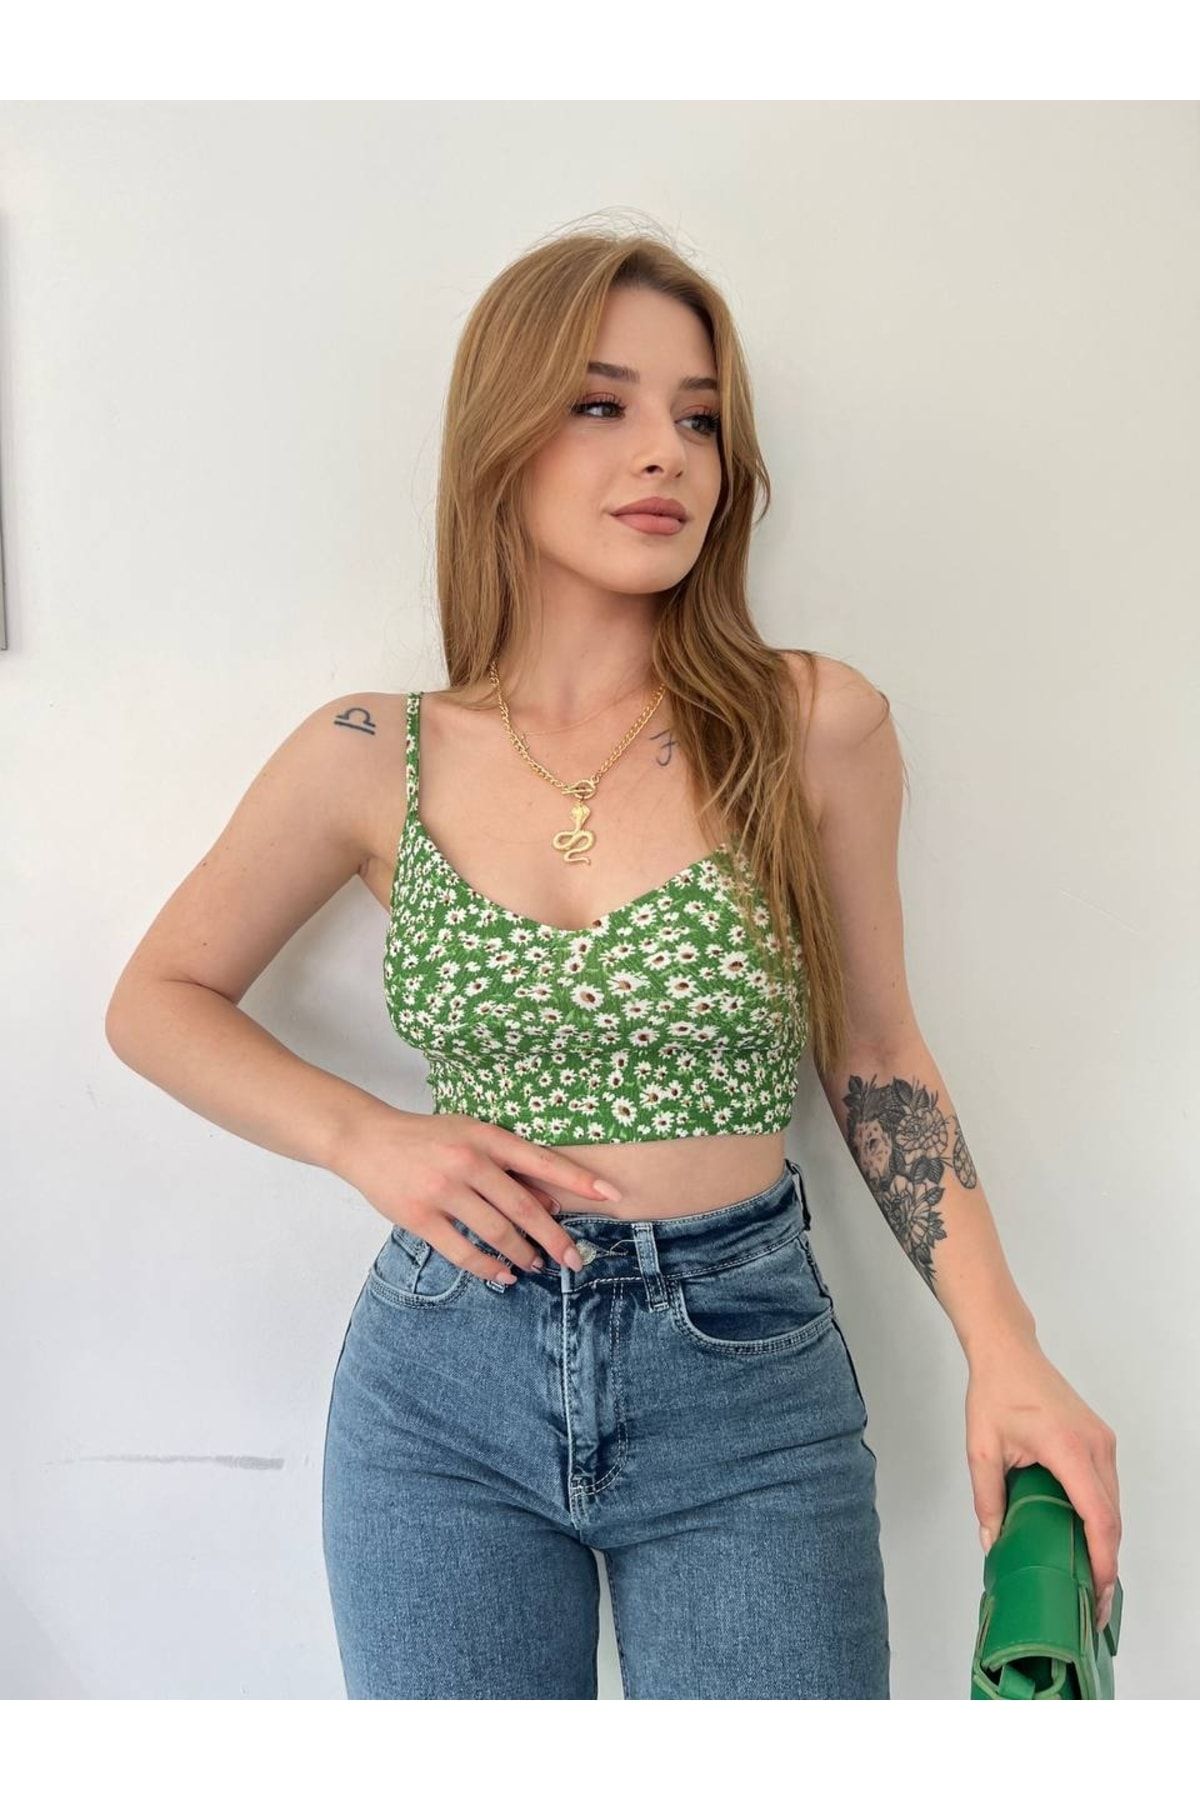 Fav Style Women's Strappy Floral Patterned Crop Top Blouse Green - Trendyol